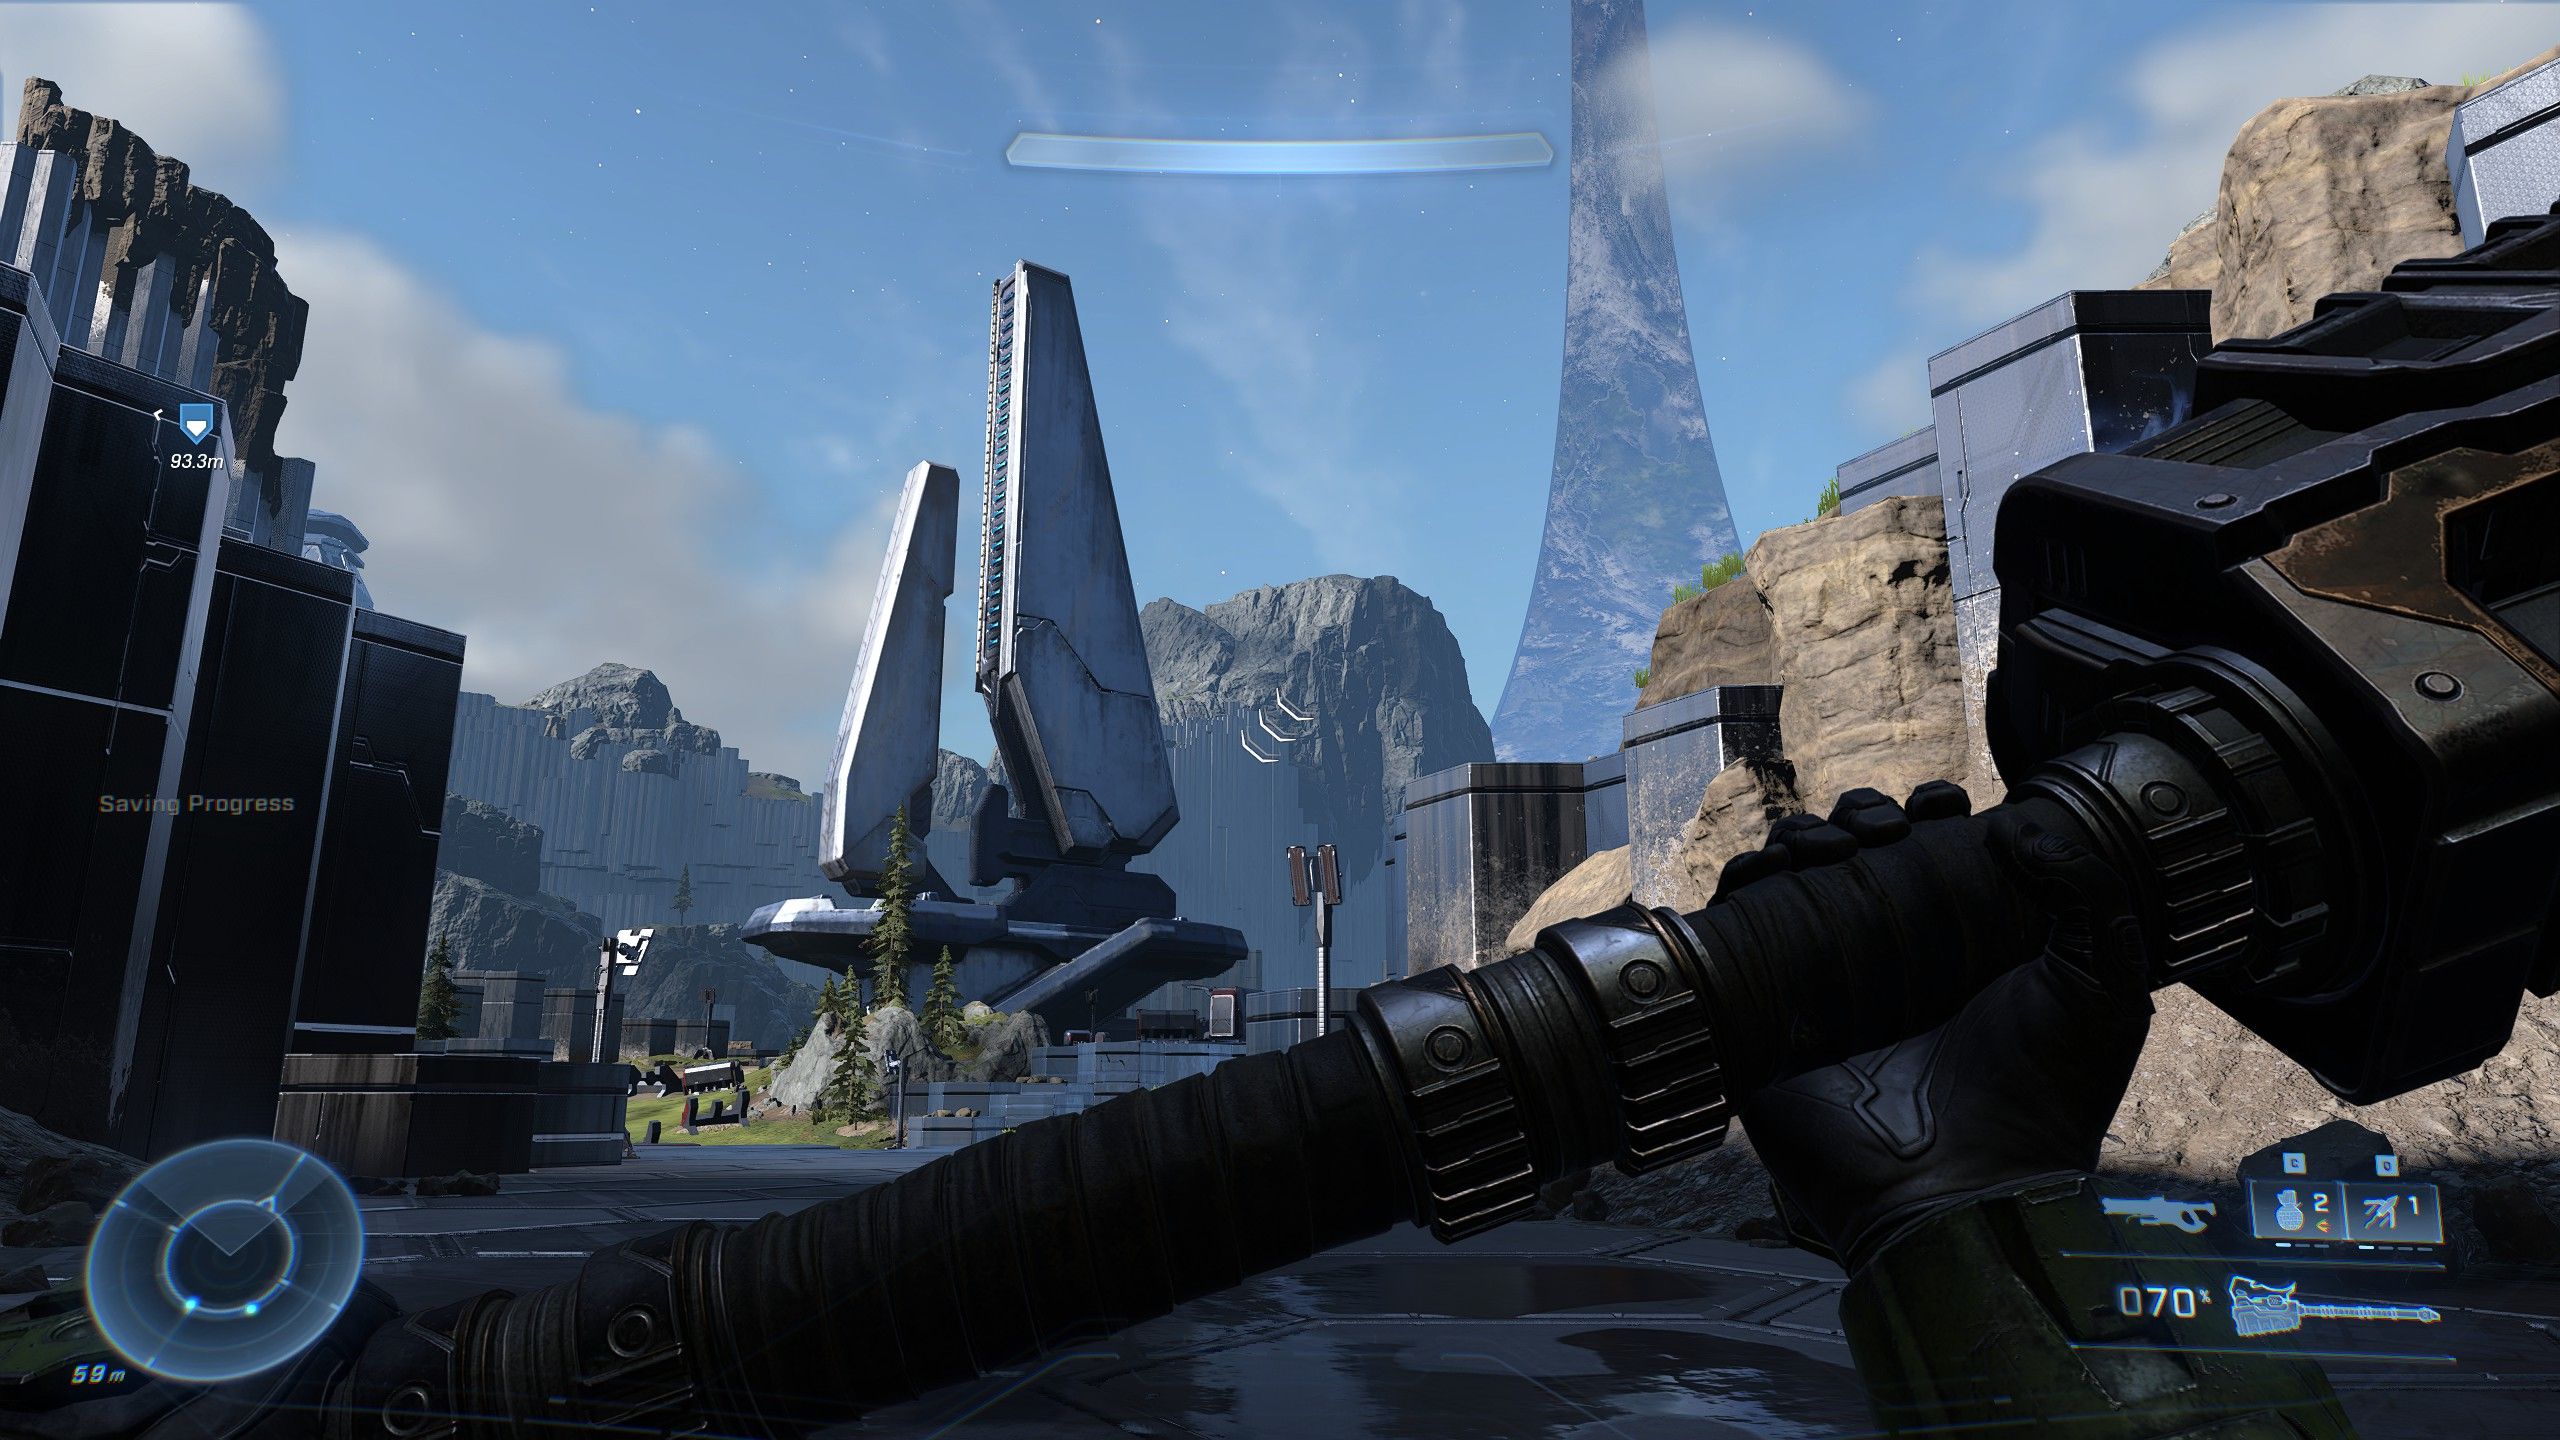 The player holds a massive hammer in Halo Infinite